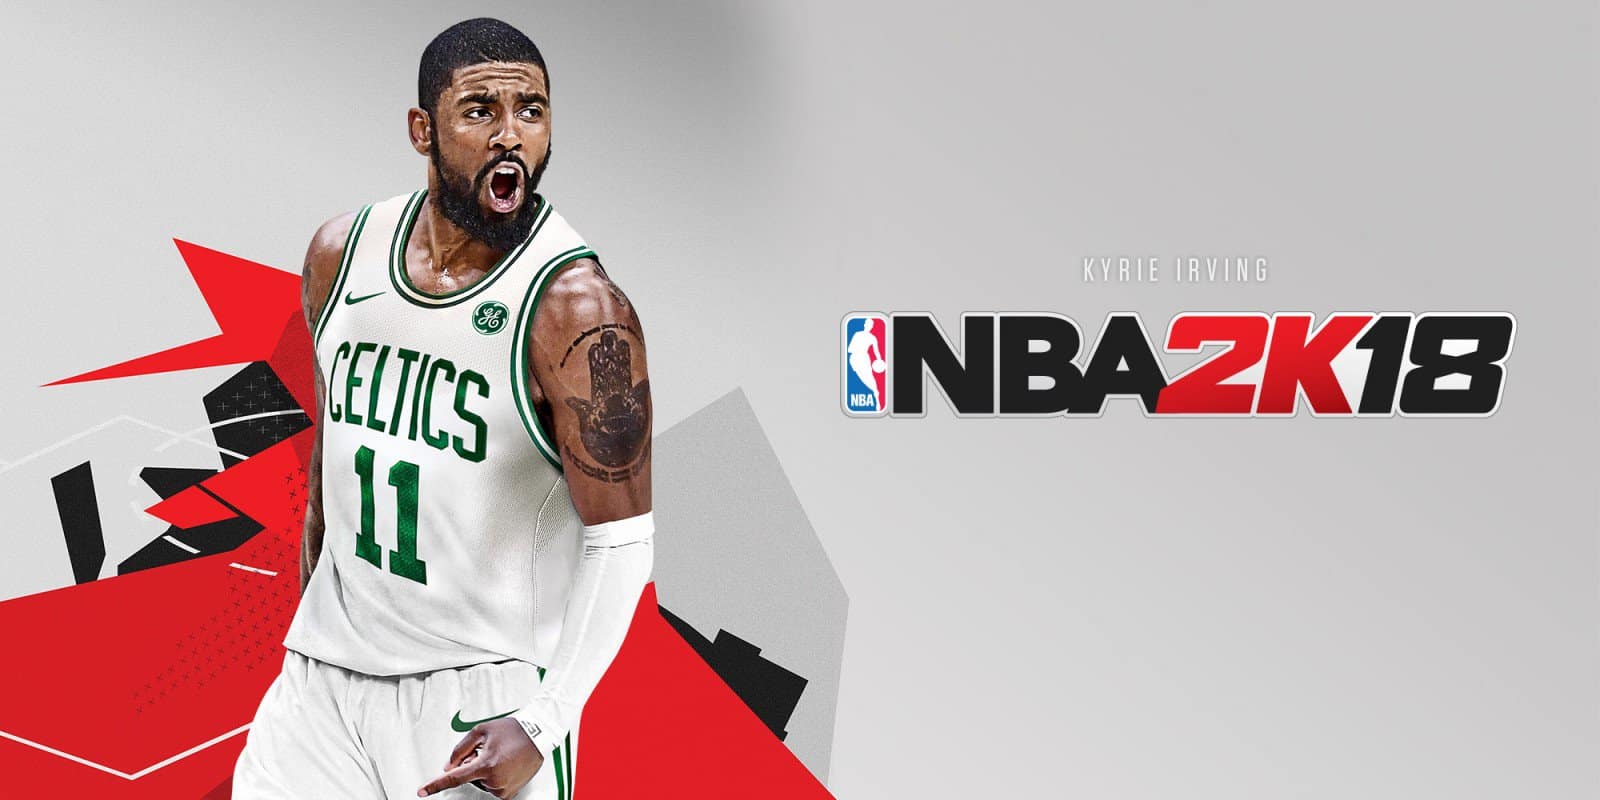 NBA 2K18 Android/iOS Mobile Version Full Free Download